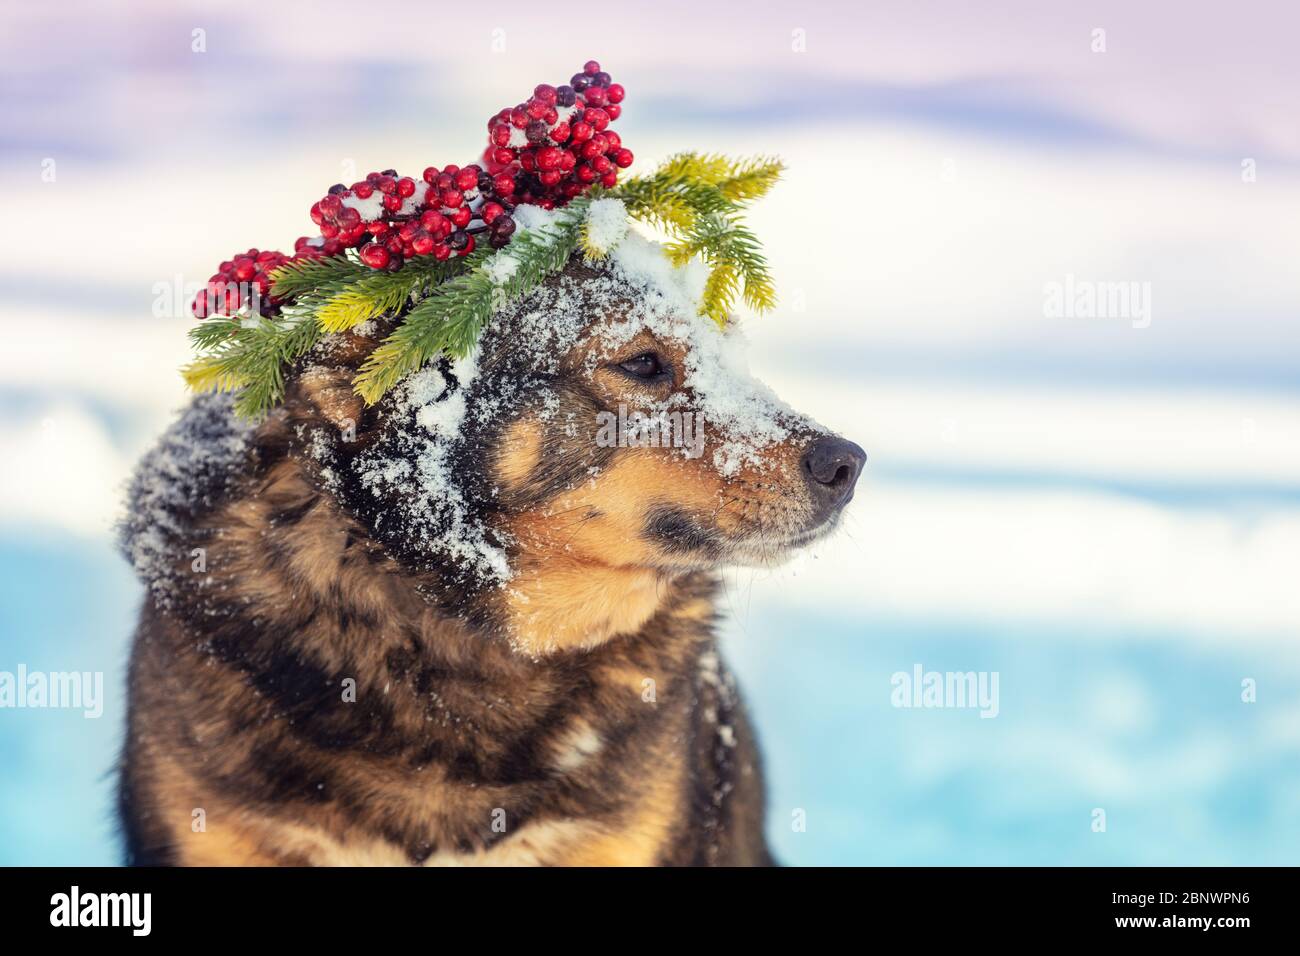 Portrait of a dog outdoors in winter. The dog in a Christmas wreath. Stock Photo